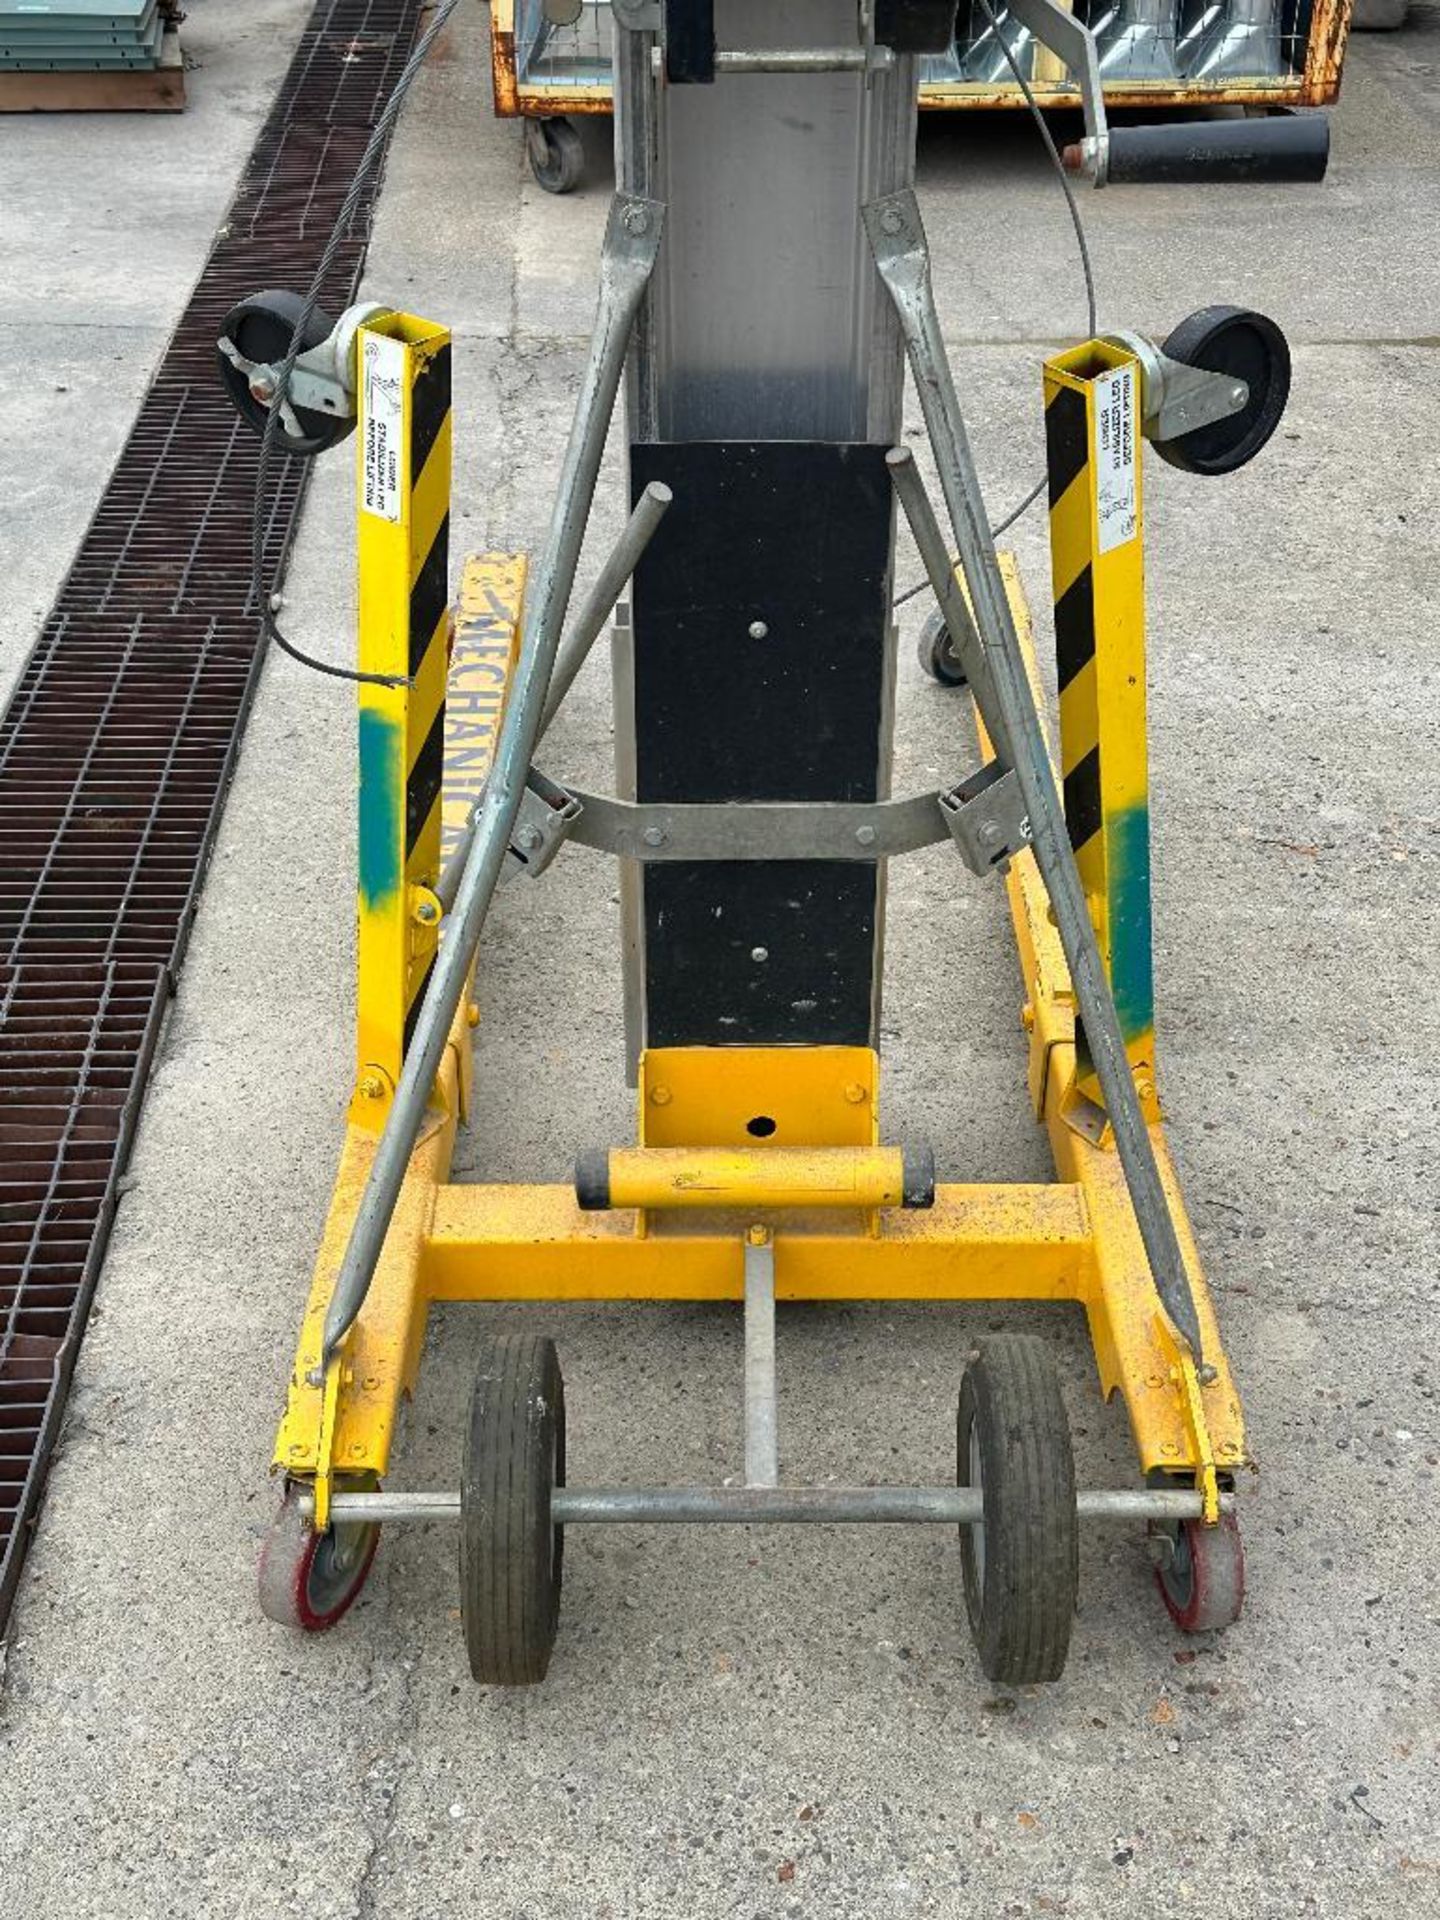 HEAVY DUTY ROLLING MANUAL MATERIAL LIFT - Image 6 of 7